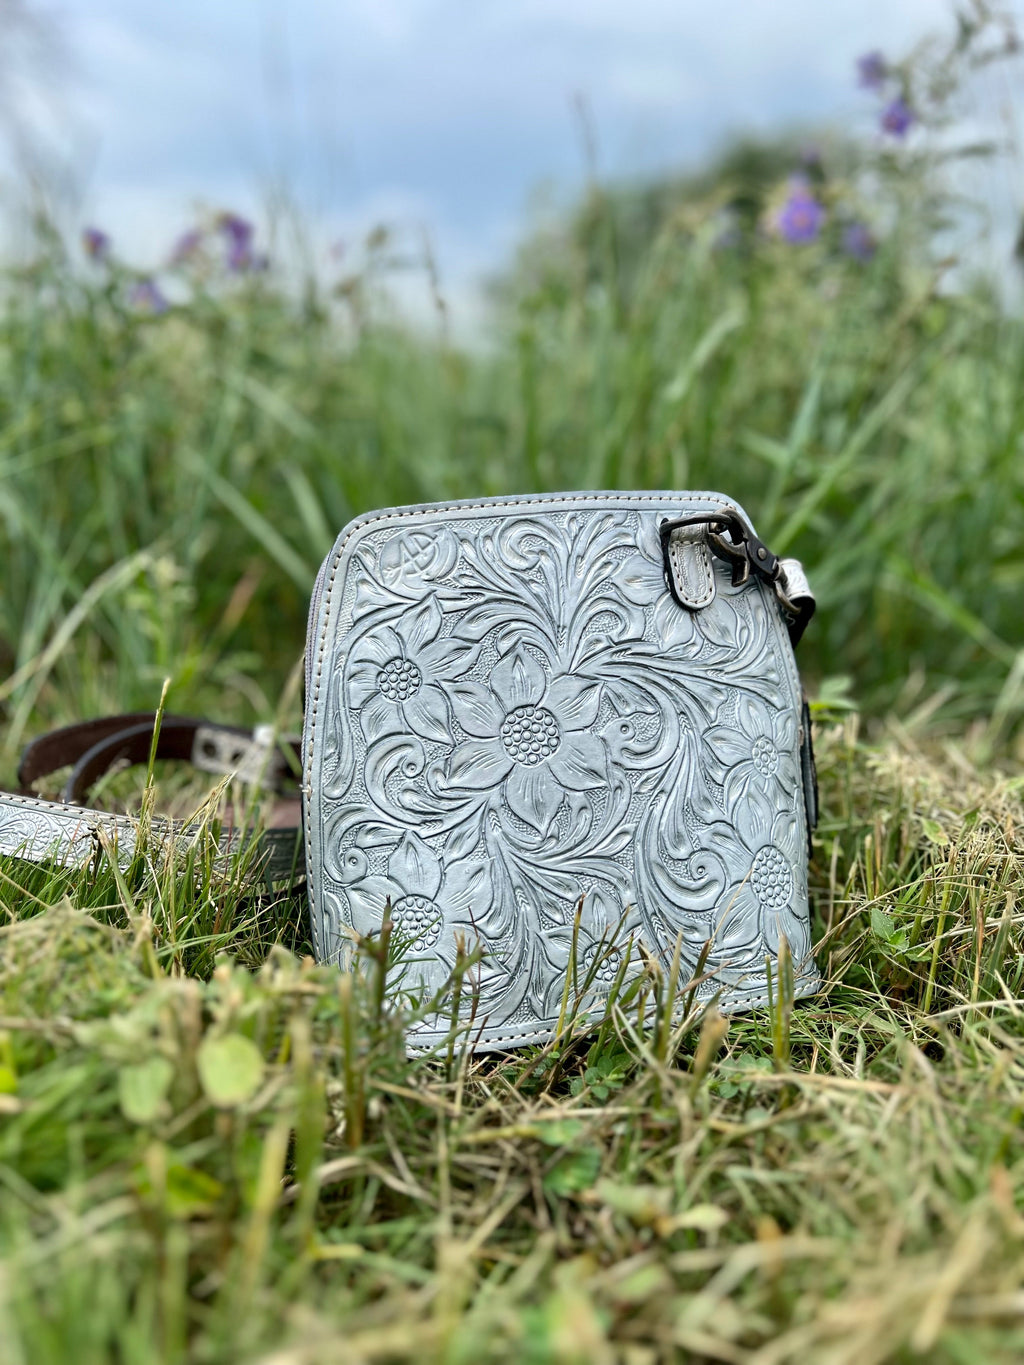 Discover the darling, garden-inspired beauty of this Silver Crossbody. Crafted with an exquisite floral tooled pattern on the front and a large basket weave tooled pattern on the back, this piece adds a subtly sophisticated air to any look. With a generous 9"W X 8"H size and a 50" adjustable and removable strap, this stunning bag offers convenience and effortless style.